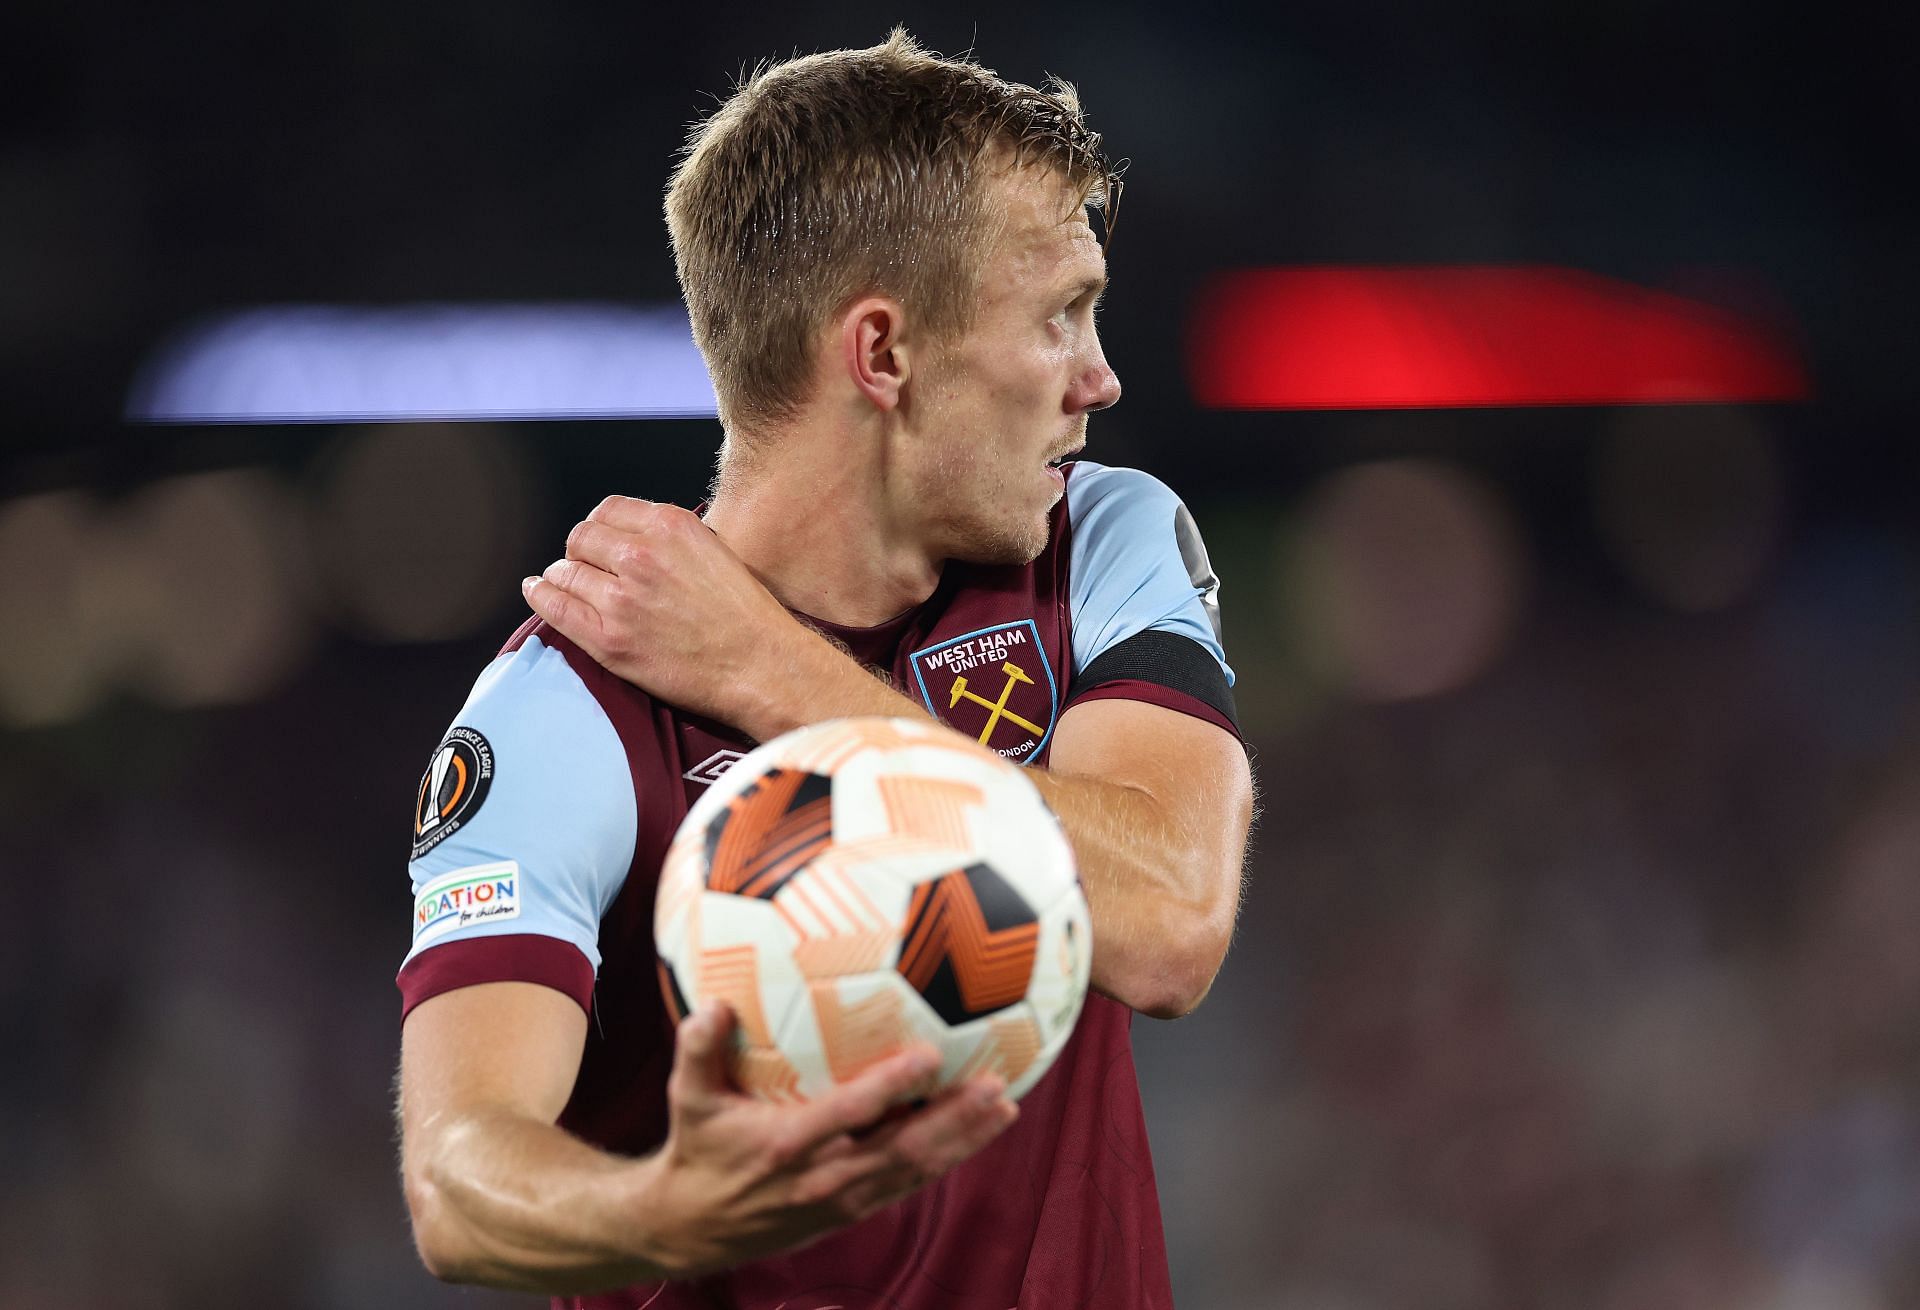 Ward-Prowse has been sensational for the Hammers.